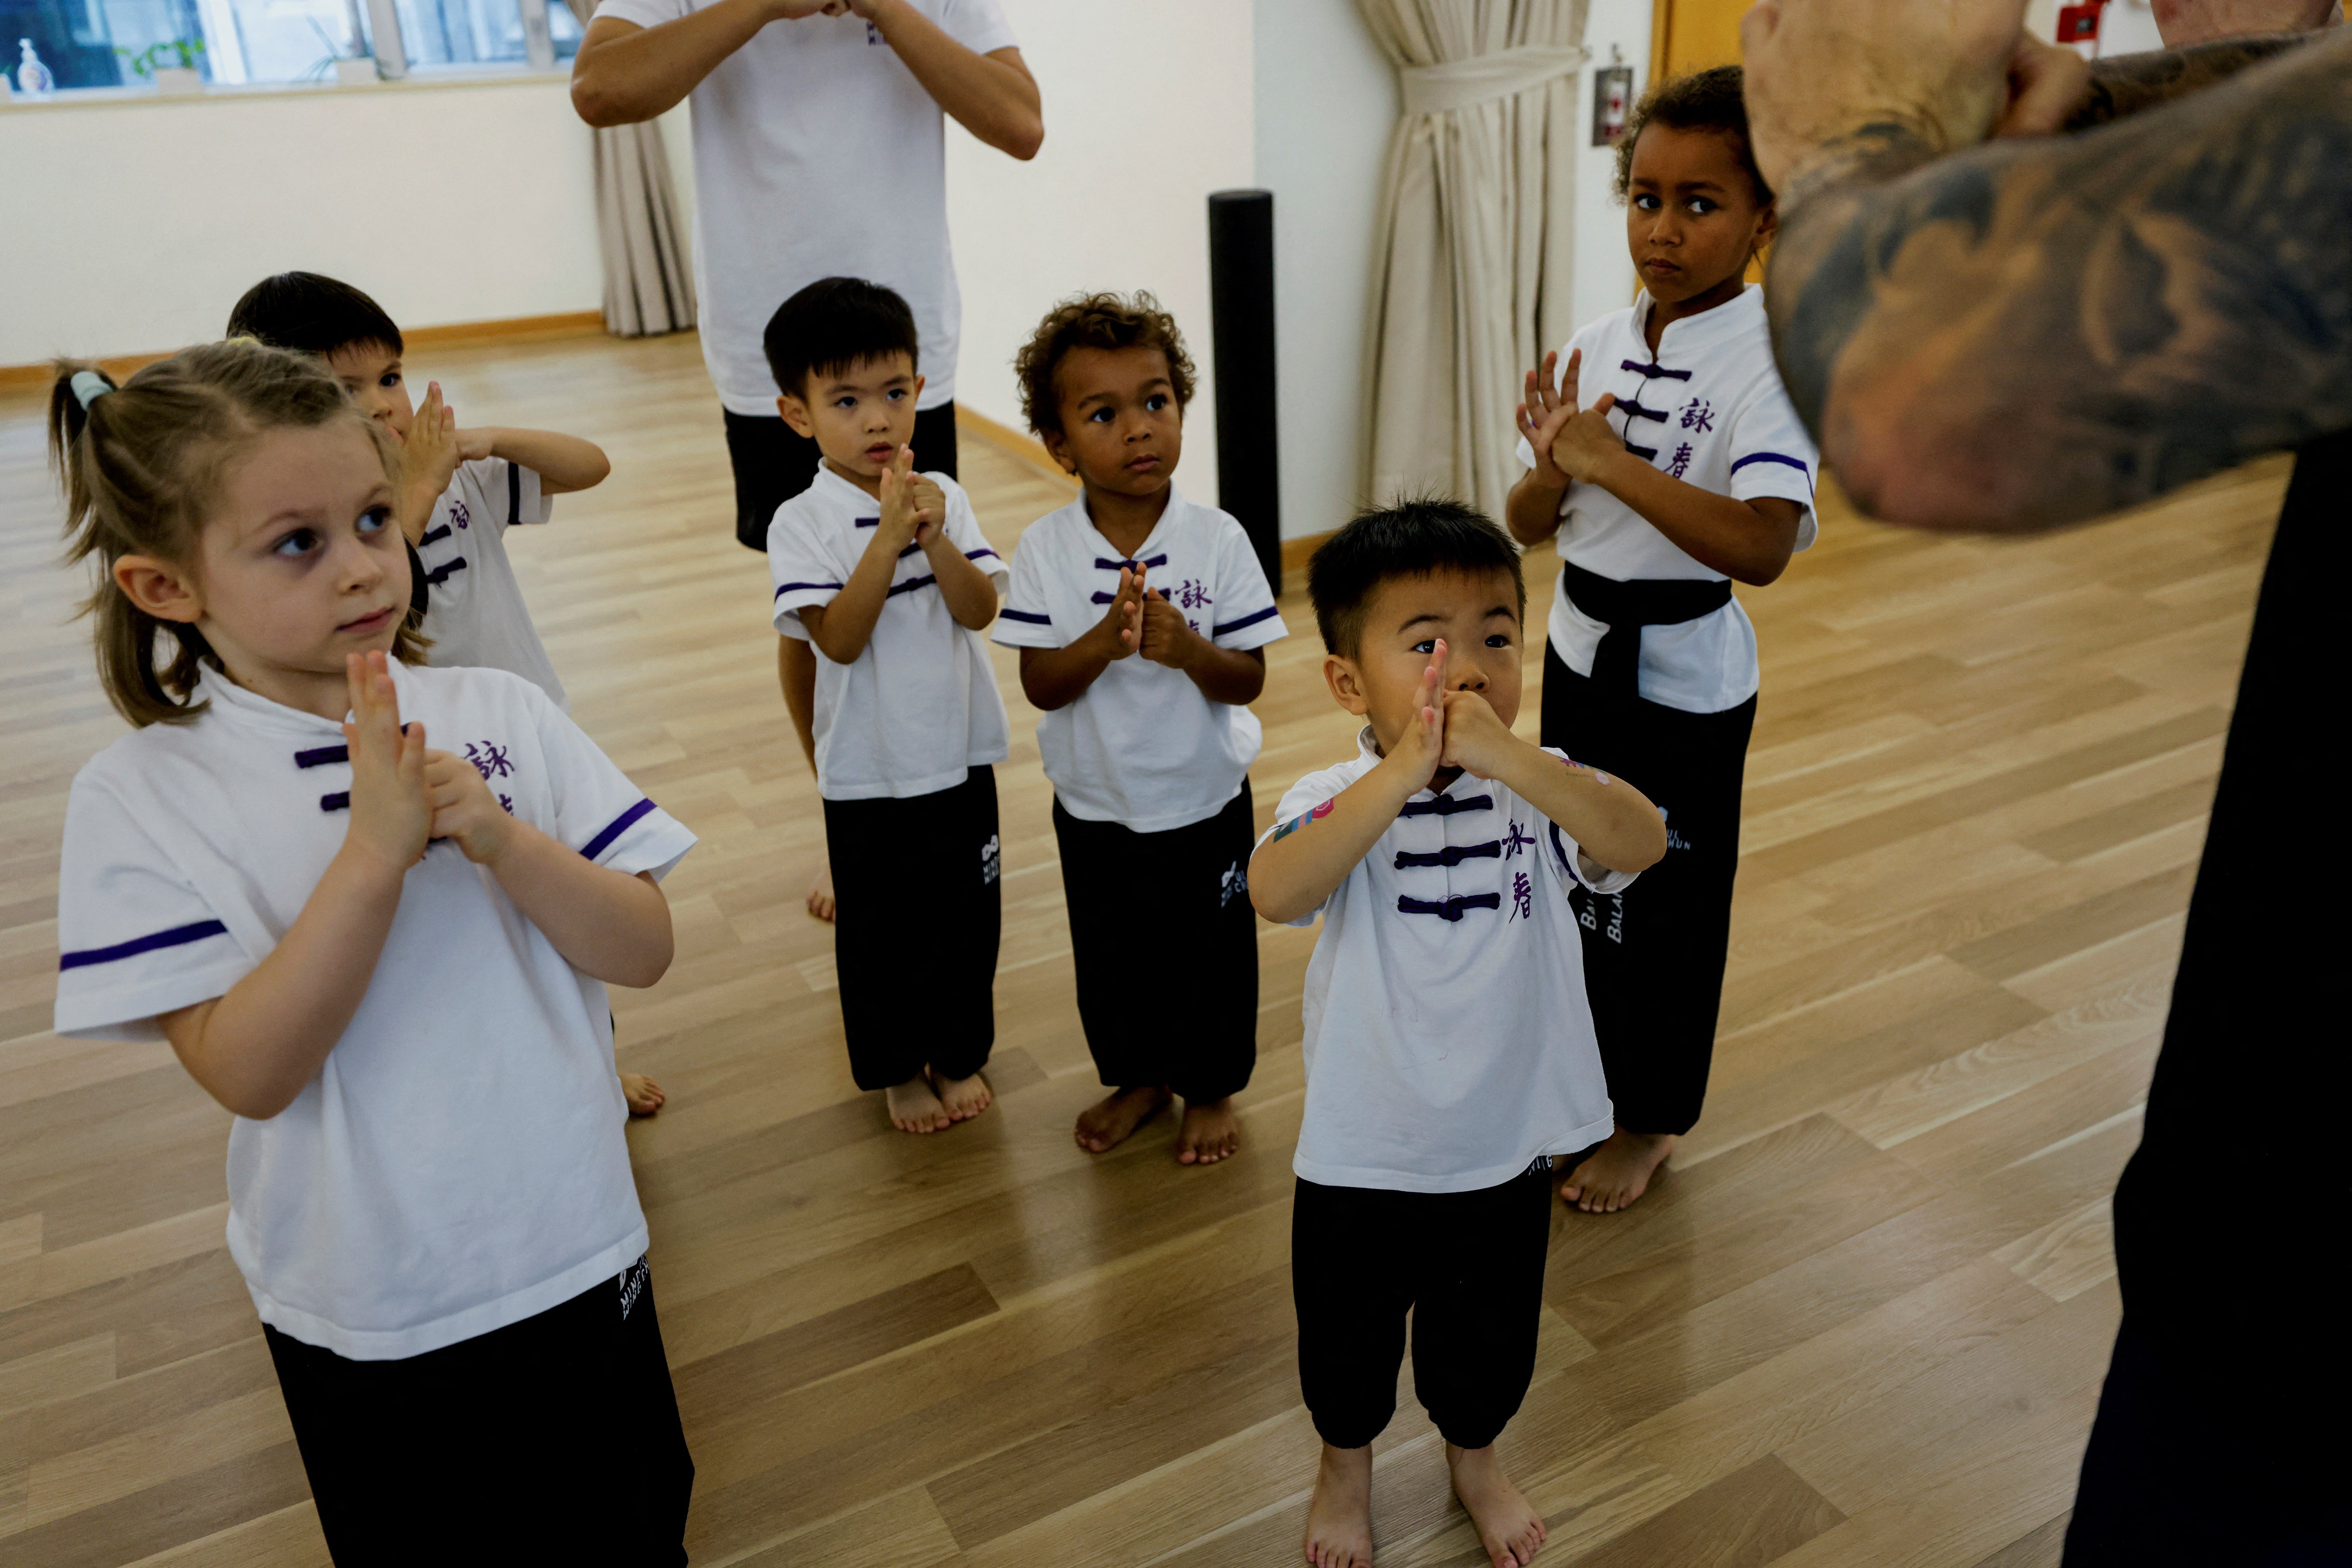 Sebby Peng, three-and-a-half years old, studies at the Mindful Wing Chun School